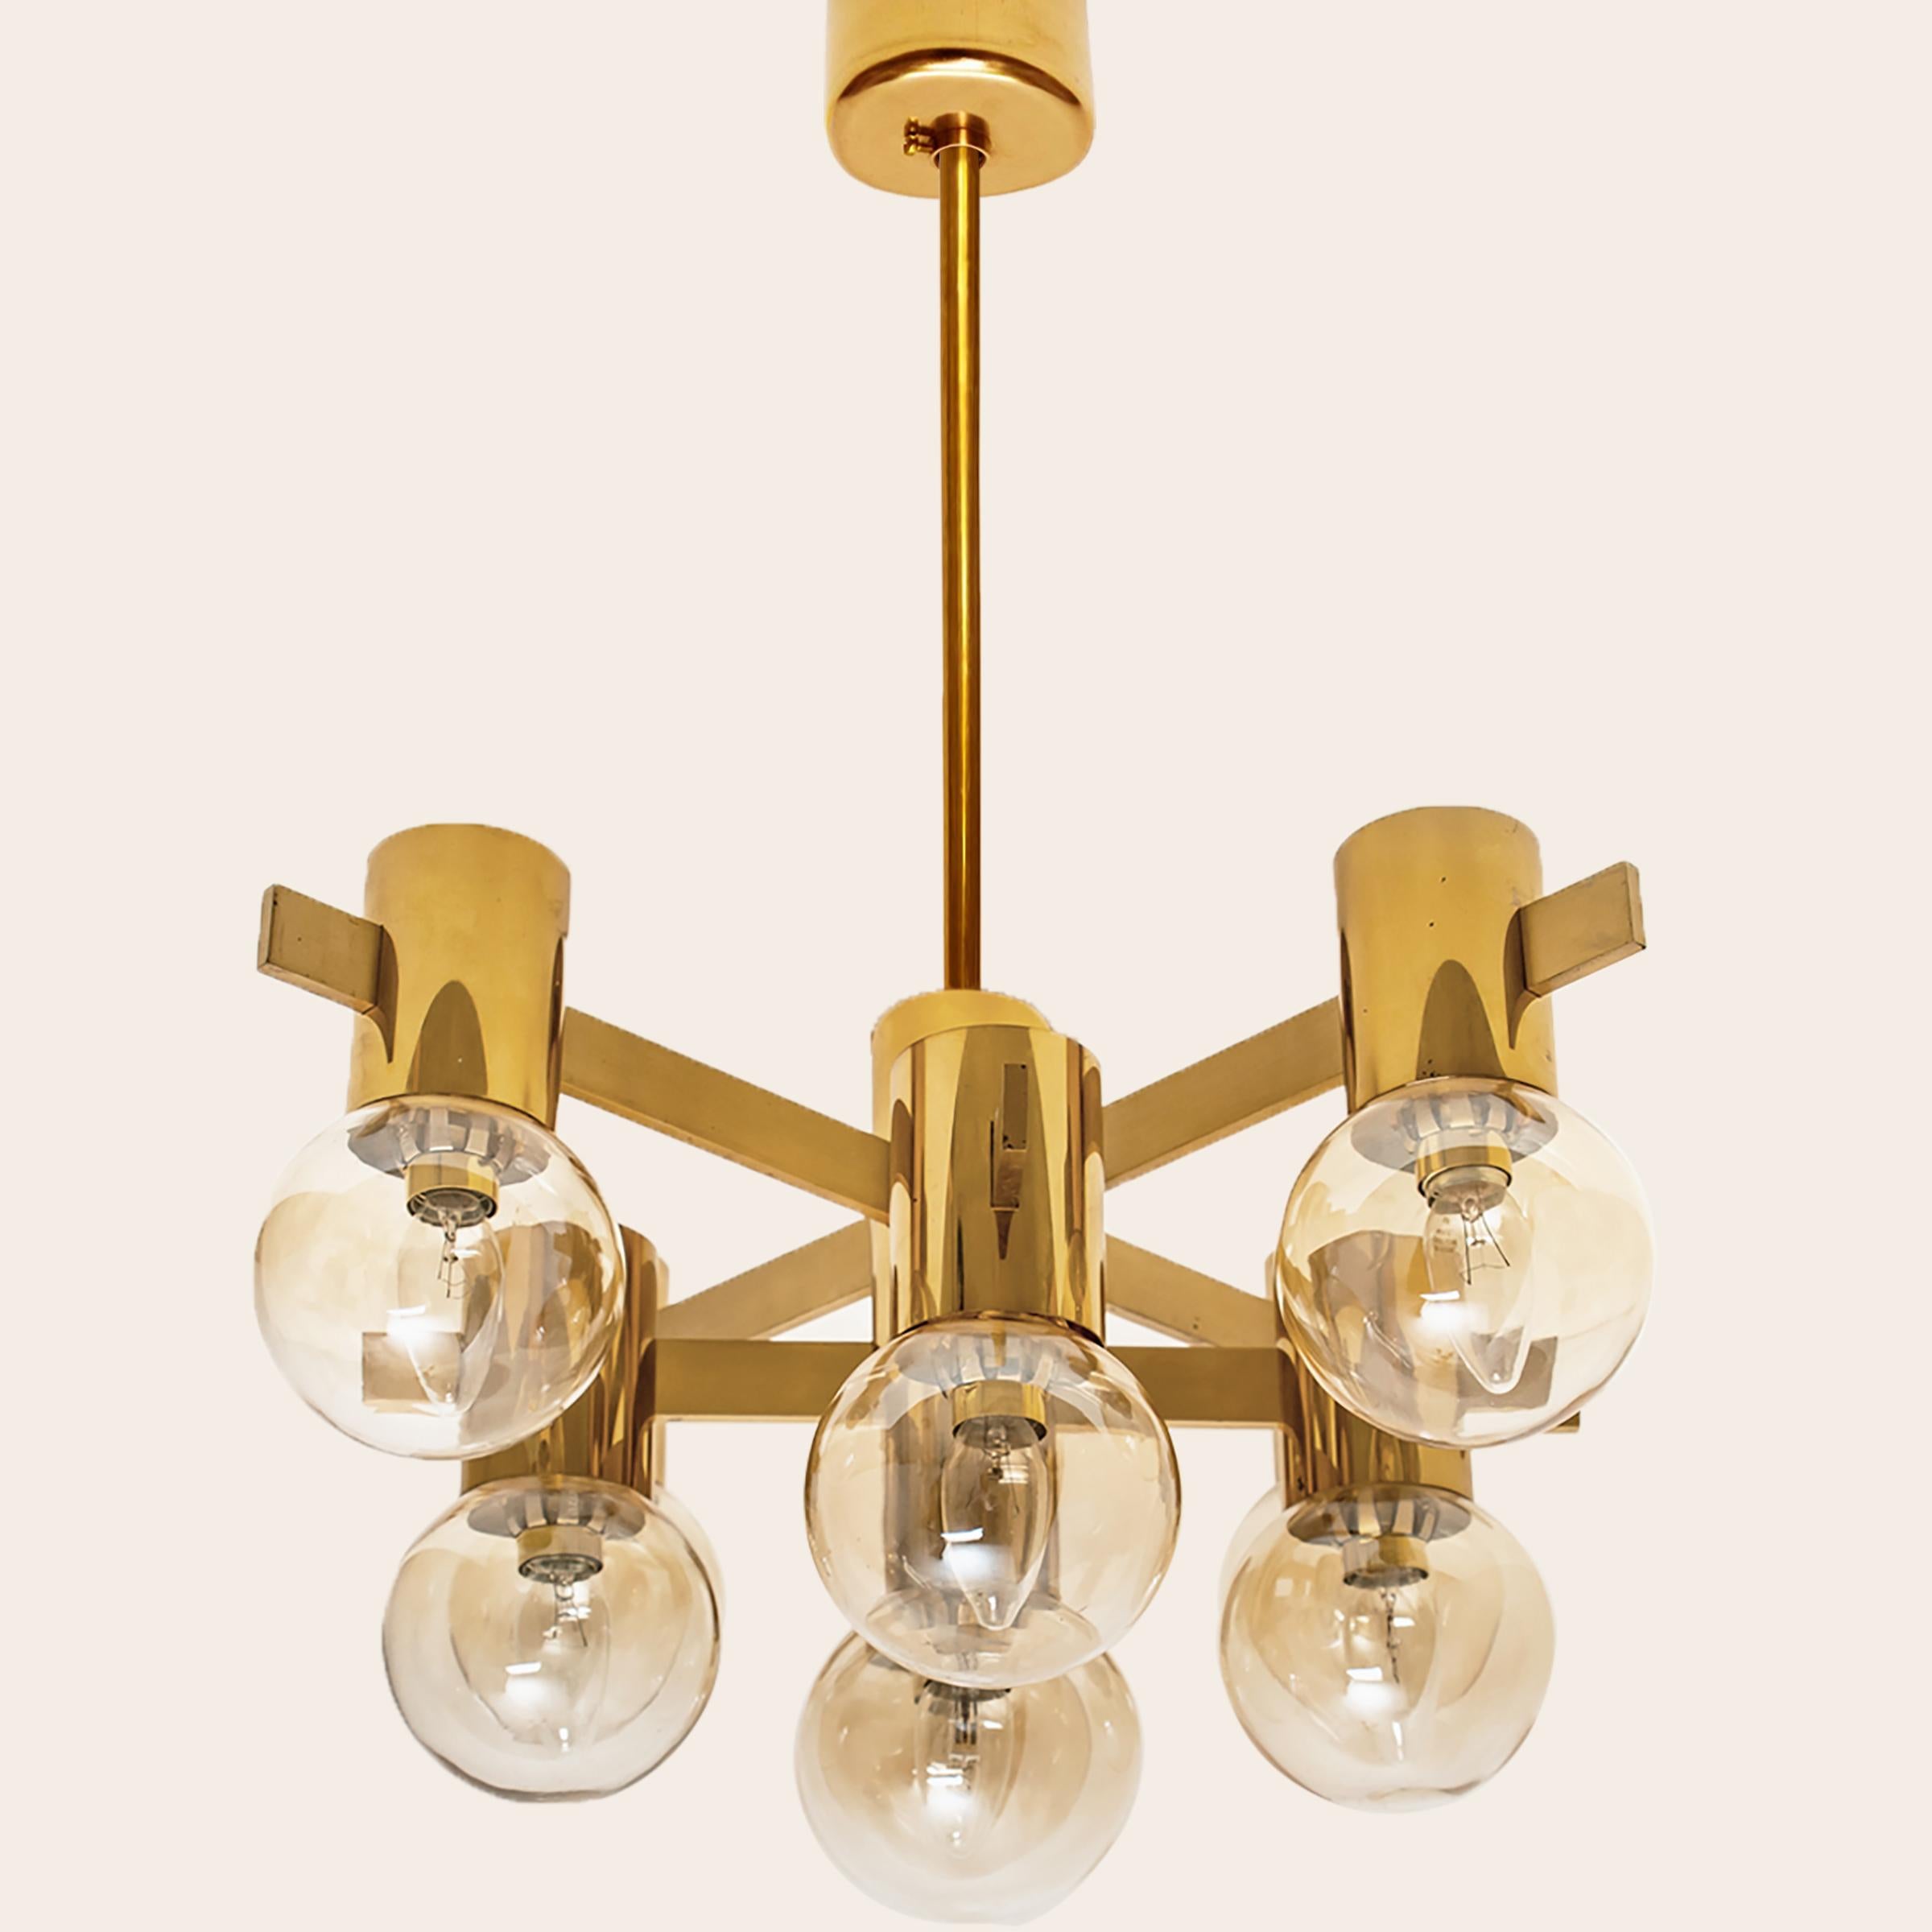 Pair of Brass and Glass Light Fixtures in the Style of Jakobsson, 1960s For Sale 5